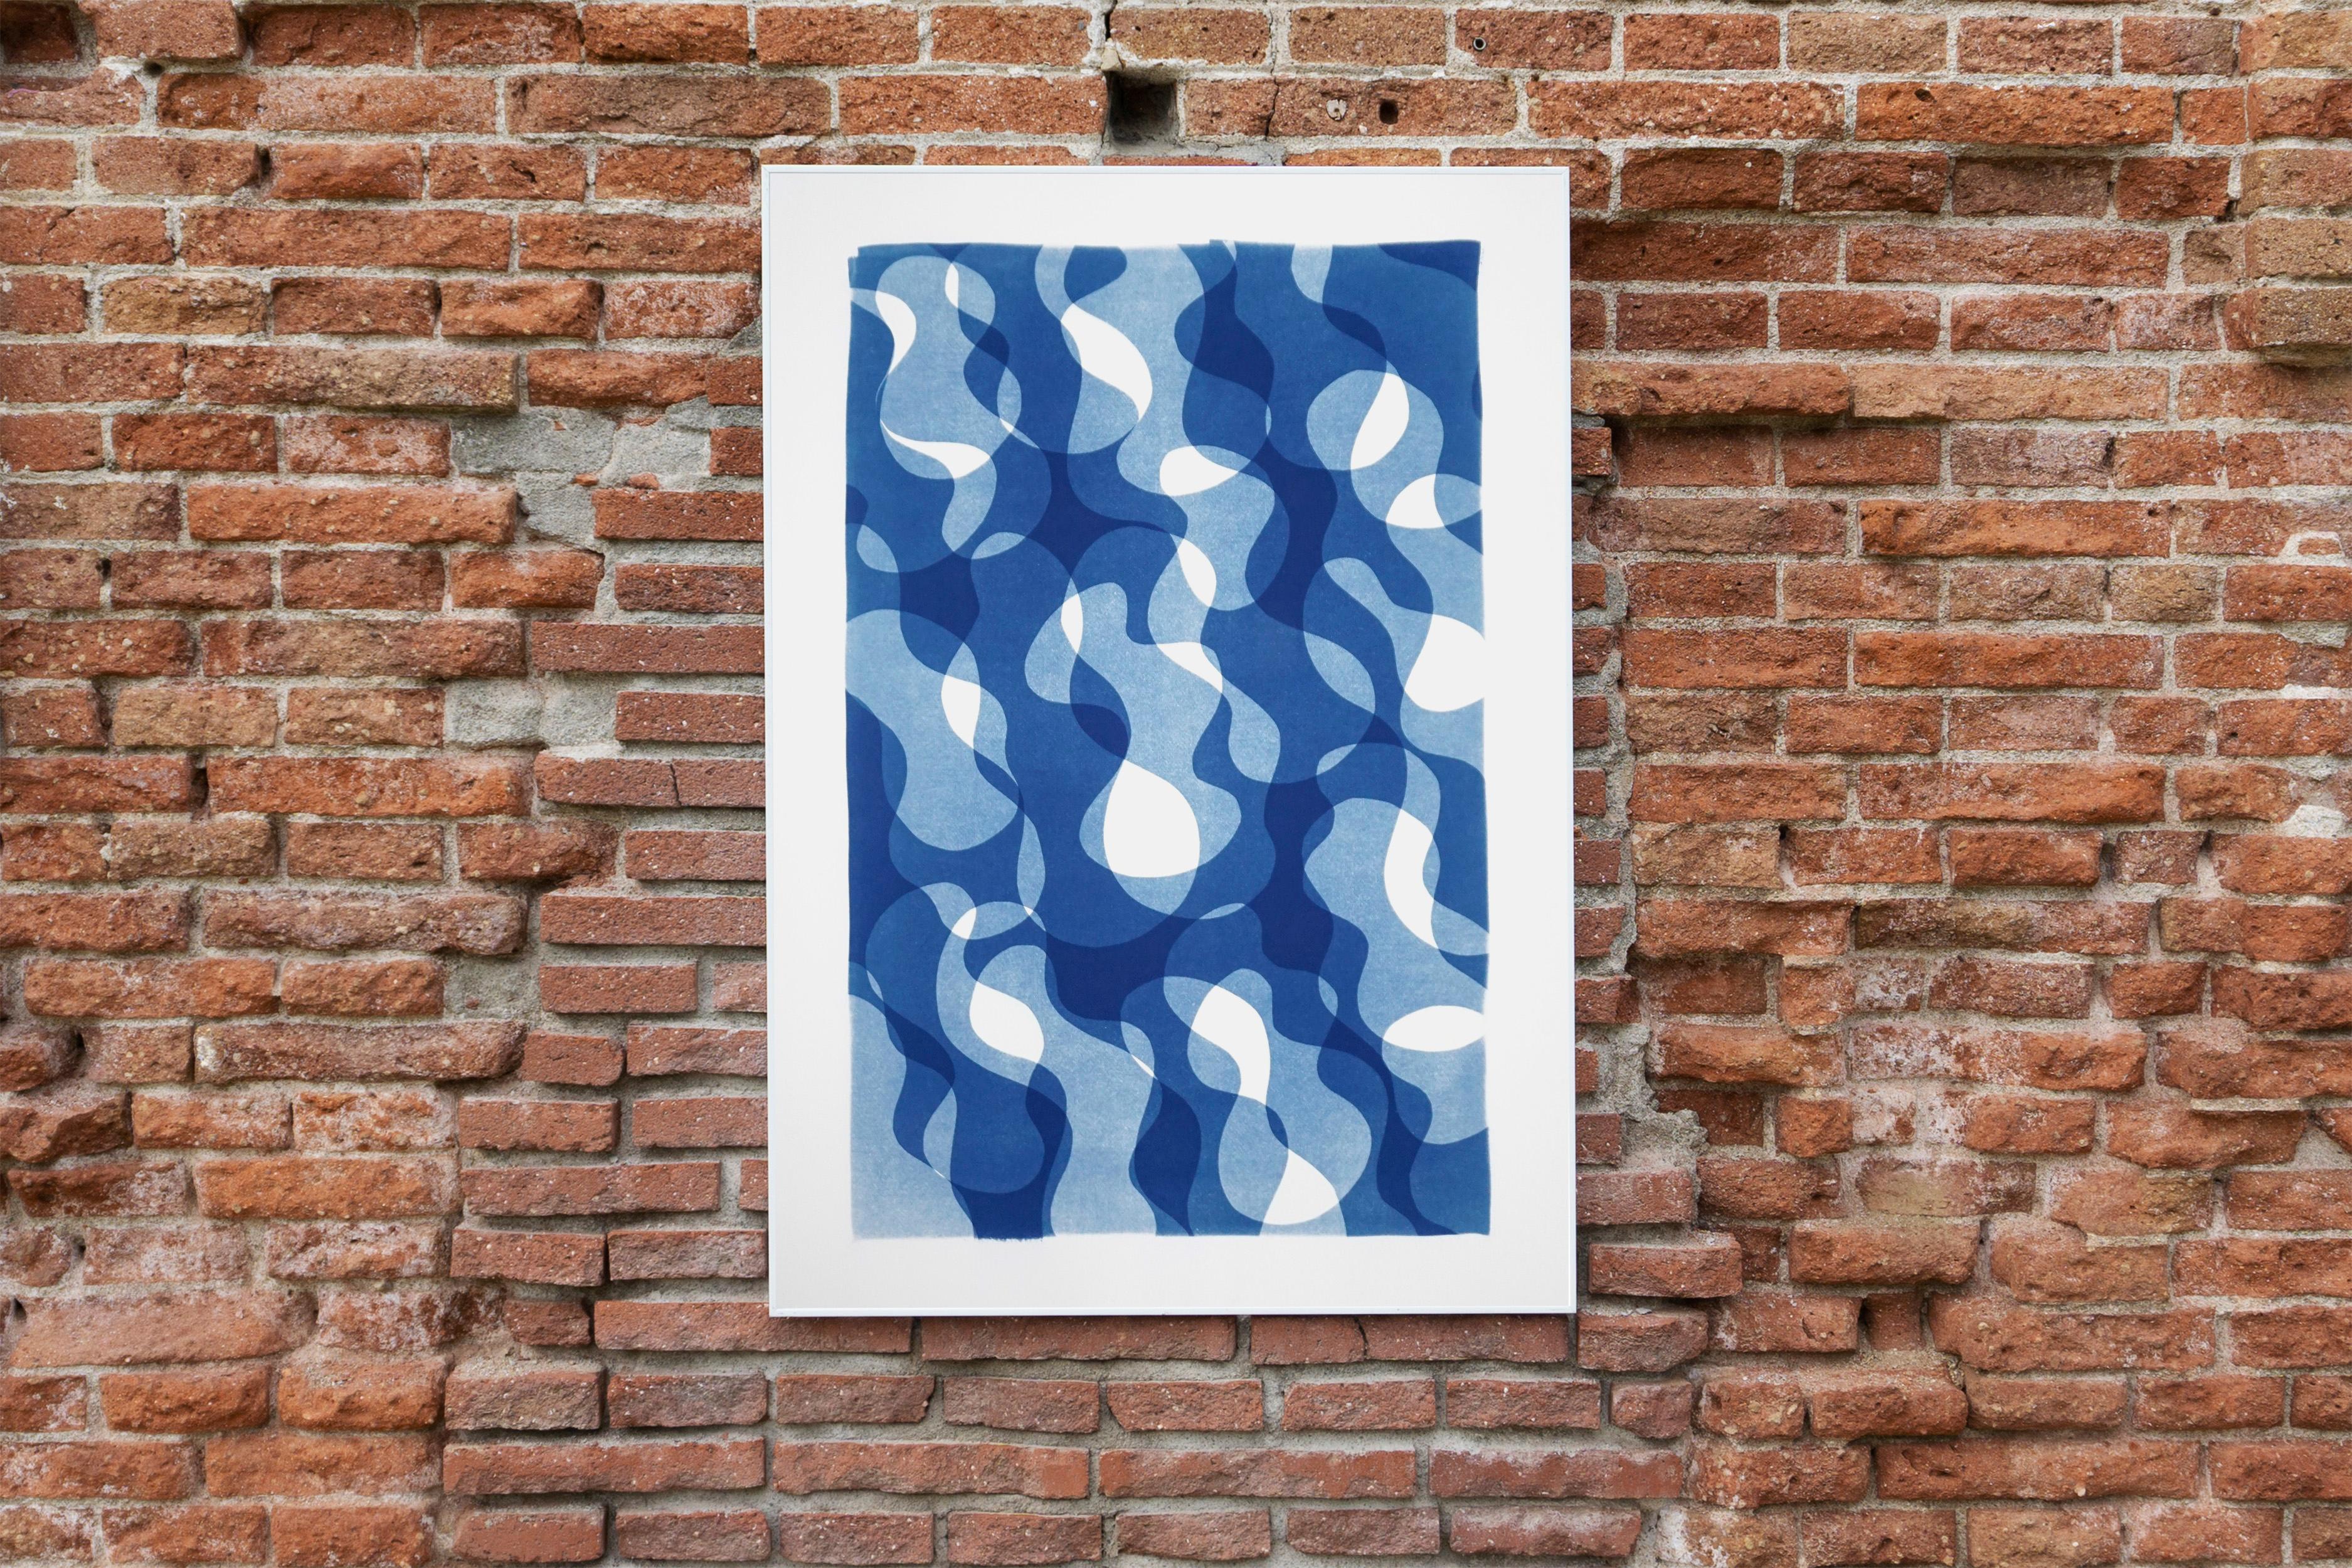 This is an exclusive handprinted unique cyanotype that takes its inspiration from the mid-century modern shapes.
It's made by layering paper cutouts and different exposures using uv-light. 

Details:
+ Title: Geometric Water Movement I
+ Year: